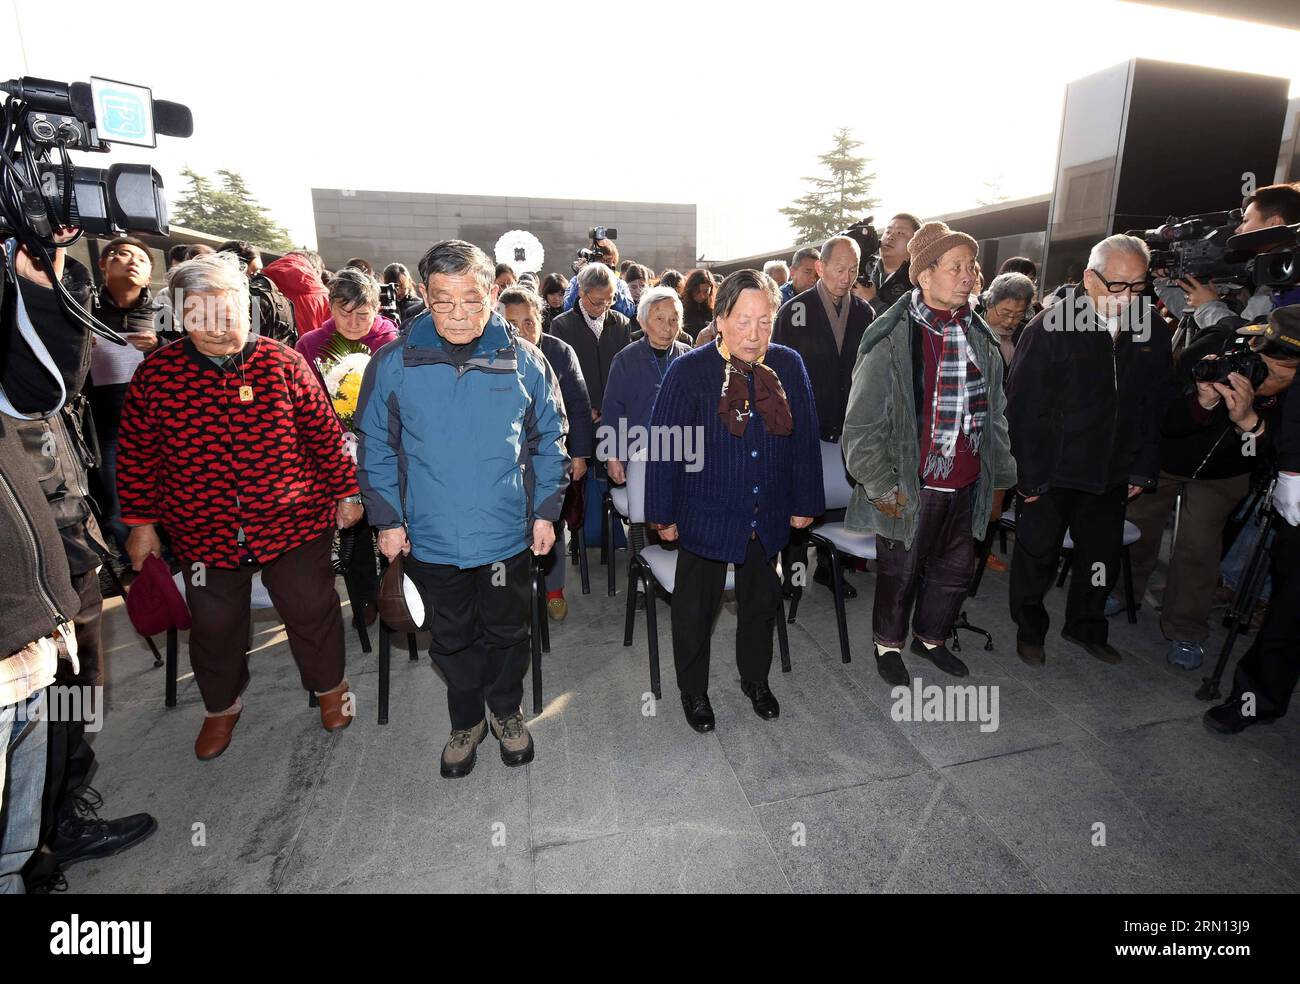 Survivors of the Nanjing Massacre and their family members mourn in front of a wall with List of Nanjing Massacre Victims in 30 Families at the Memorial Hall of the Victims in Nanjing Massacre by Japanese Invaders in Nanjing, capital of east China s Jiangsu Province, Dec. 1, 2014. A series of ceremonies were held by people to mourn their family members killed in the 1937 massacre ahead of the National Memorial Day for Nanjing Massacre Victims, which falls on Dec. 13. ) (ry) CHINA-NANJING-MASSACRE-MEMORIAL CEREMONIES (CN) SunxCan PUBLICATIONxNOTxINxCHN   Survivors of The Nanjing Massacre and th Stock Photo